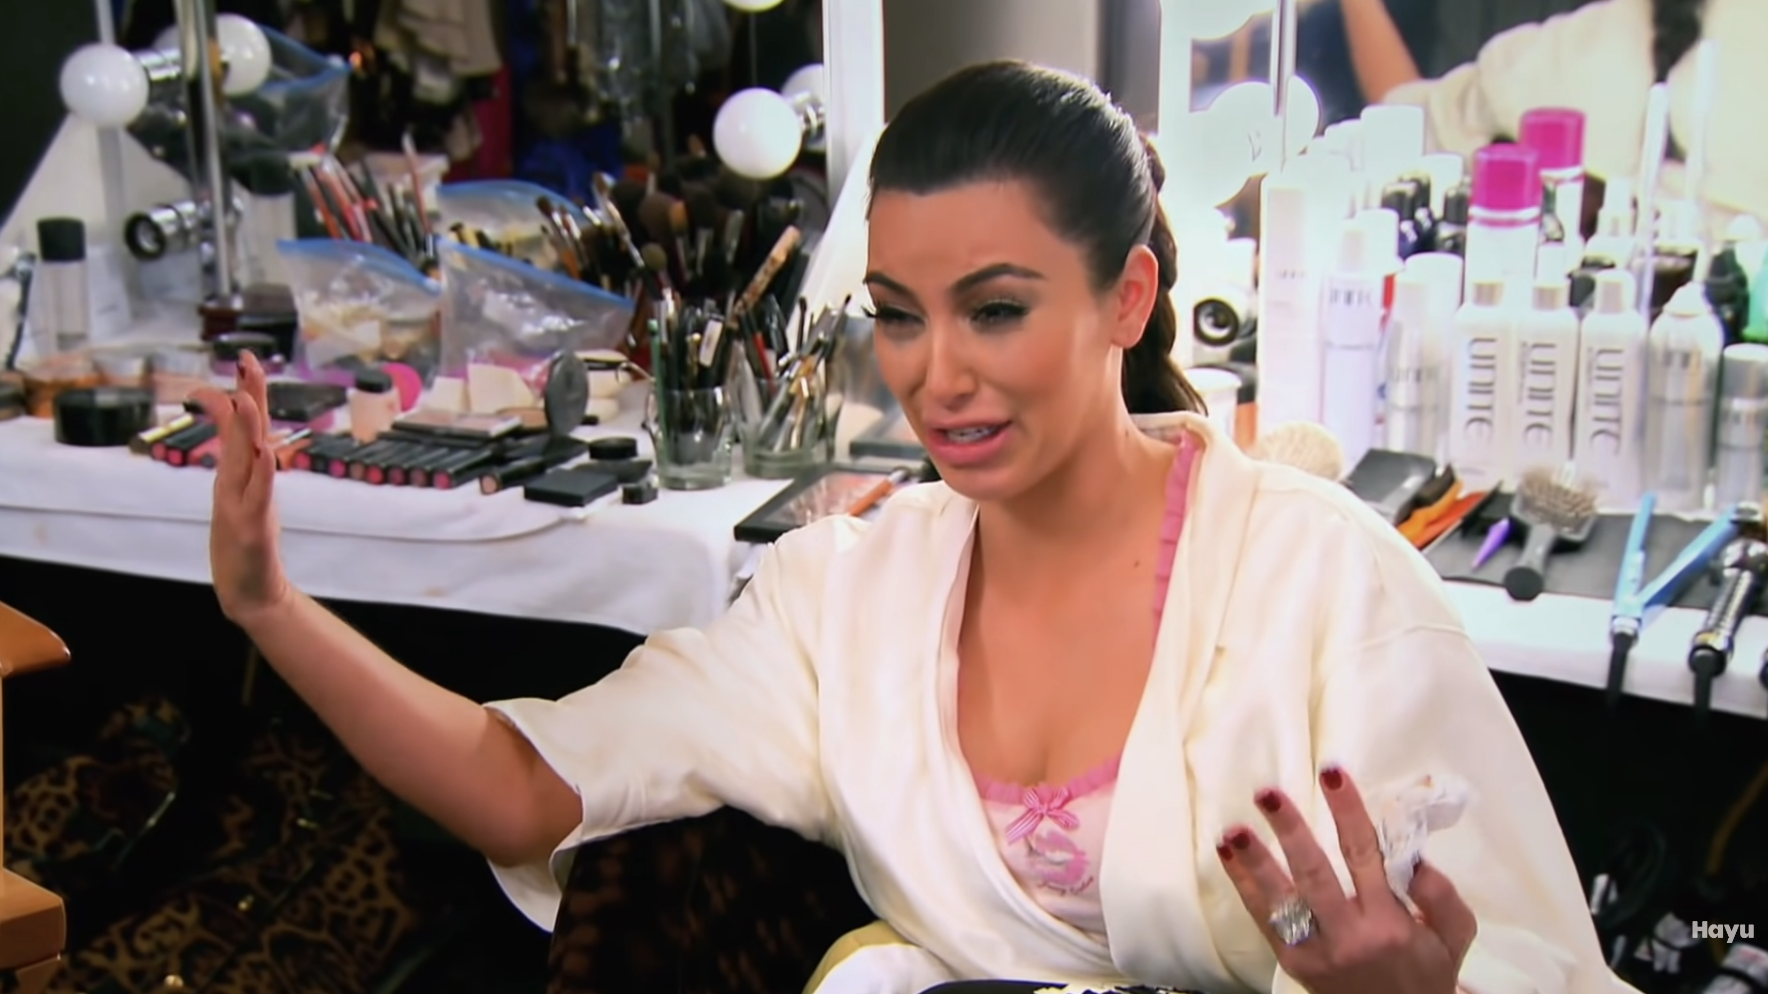 Kim crying in front of a vanity mirror